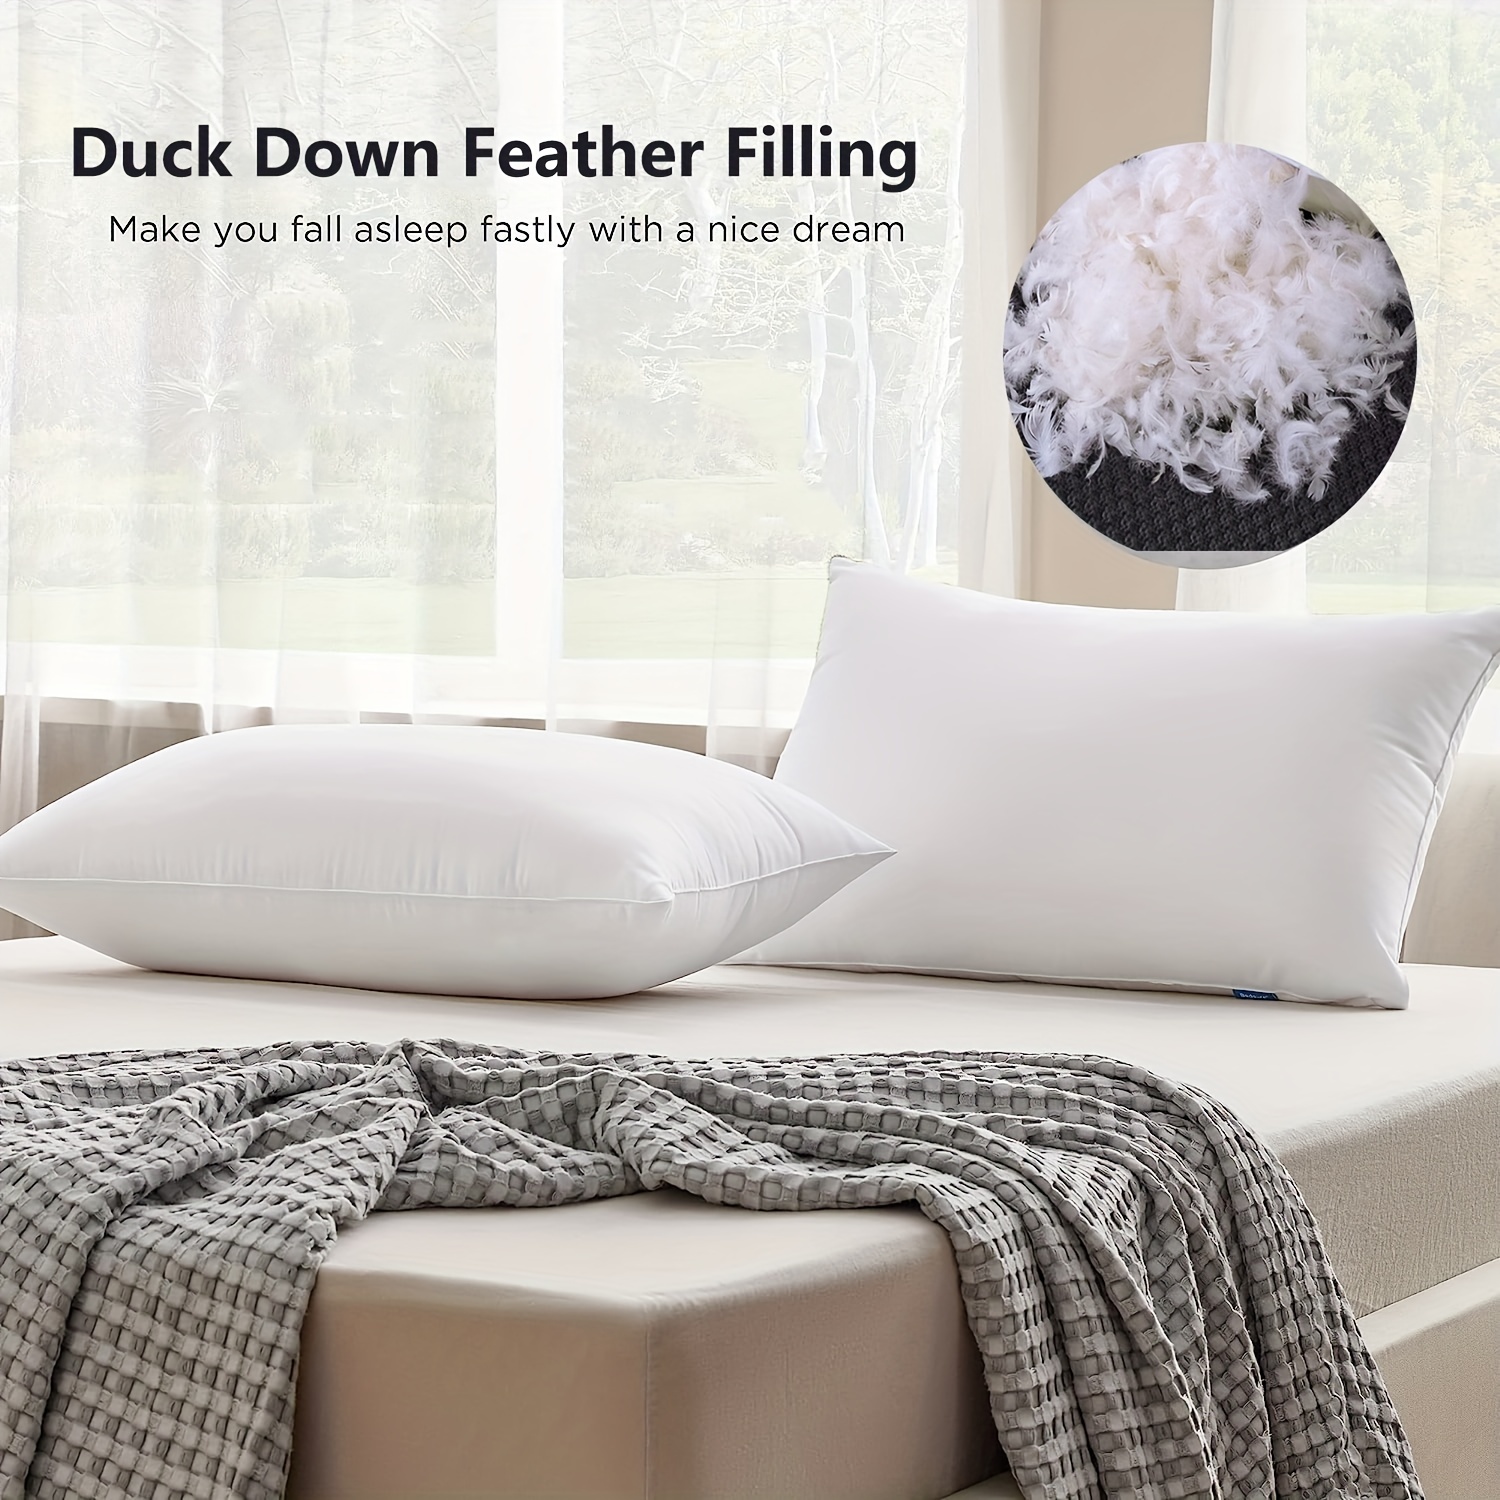 30 X 40 Cm Filling Cushion With Plump 300 G Feather Filling, Sofa Cushion,  Inner Cushion, Feather Cushion 